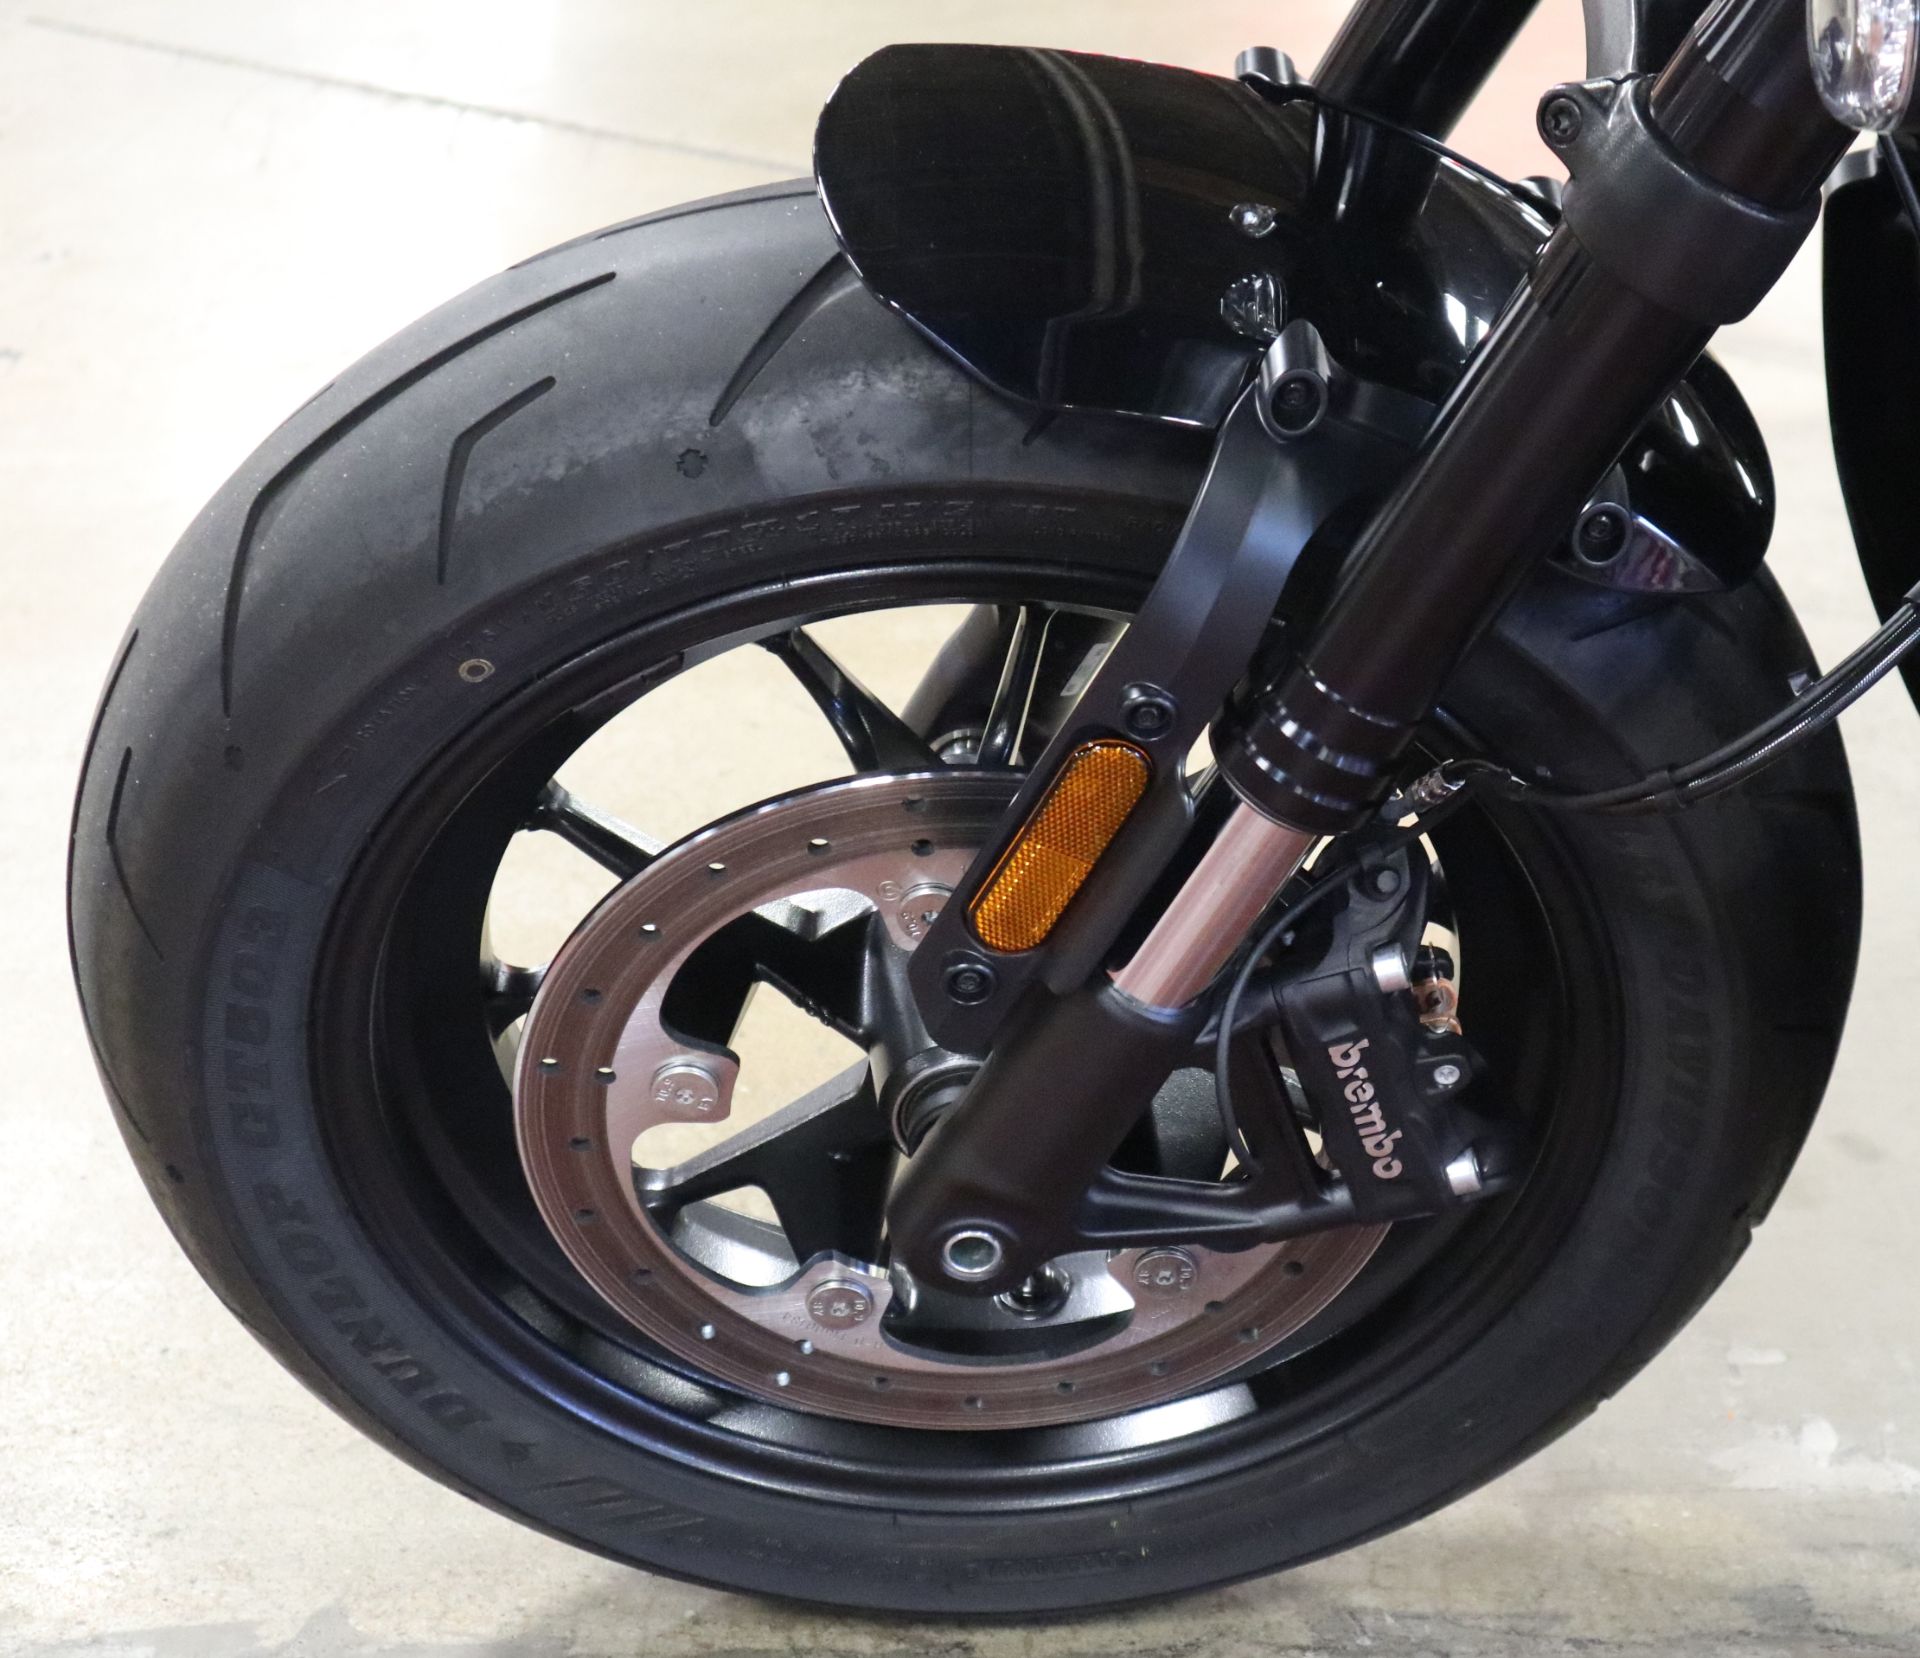 2021 Harley-Davidson Sportster® S in New London, Connecticut - Photo 12